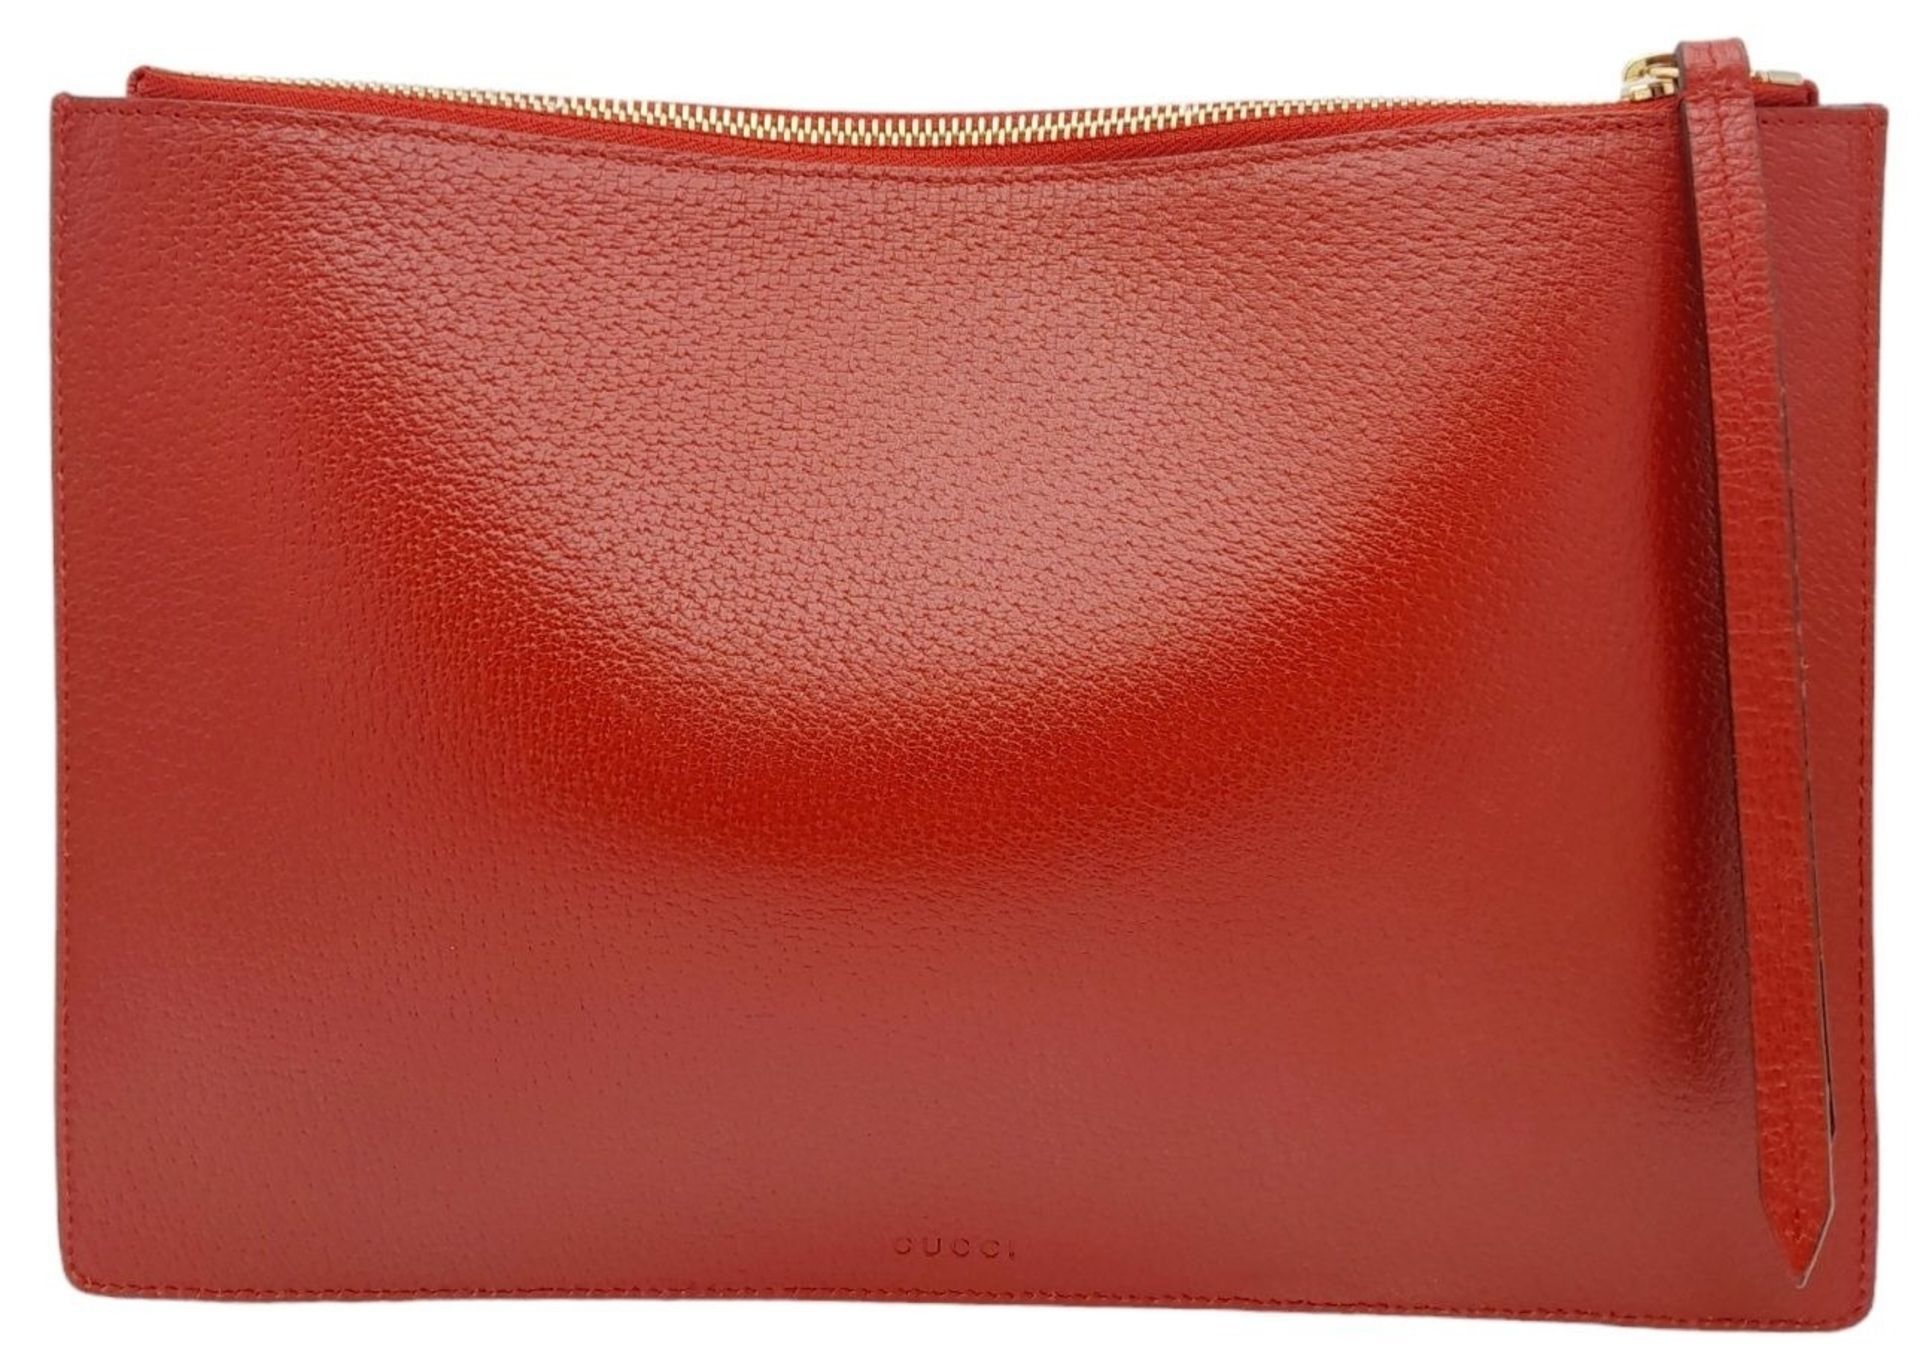 A Gucci Monogram 'Tian' Clutch Bag. Leather exterior with a depiction of a bird in nature, red - Image 5 of 7